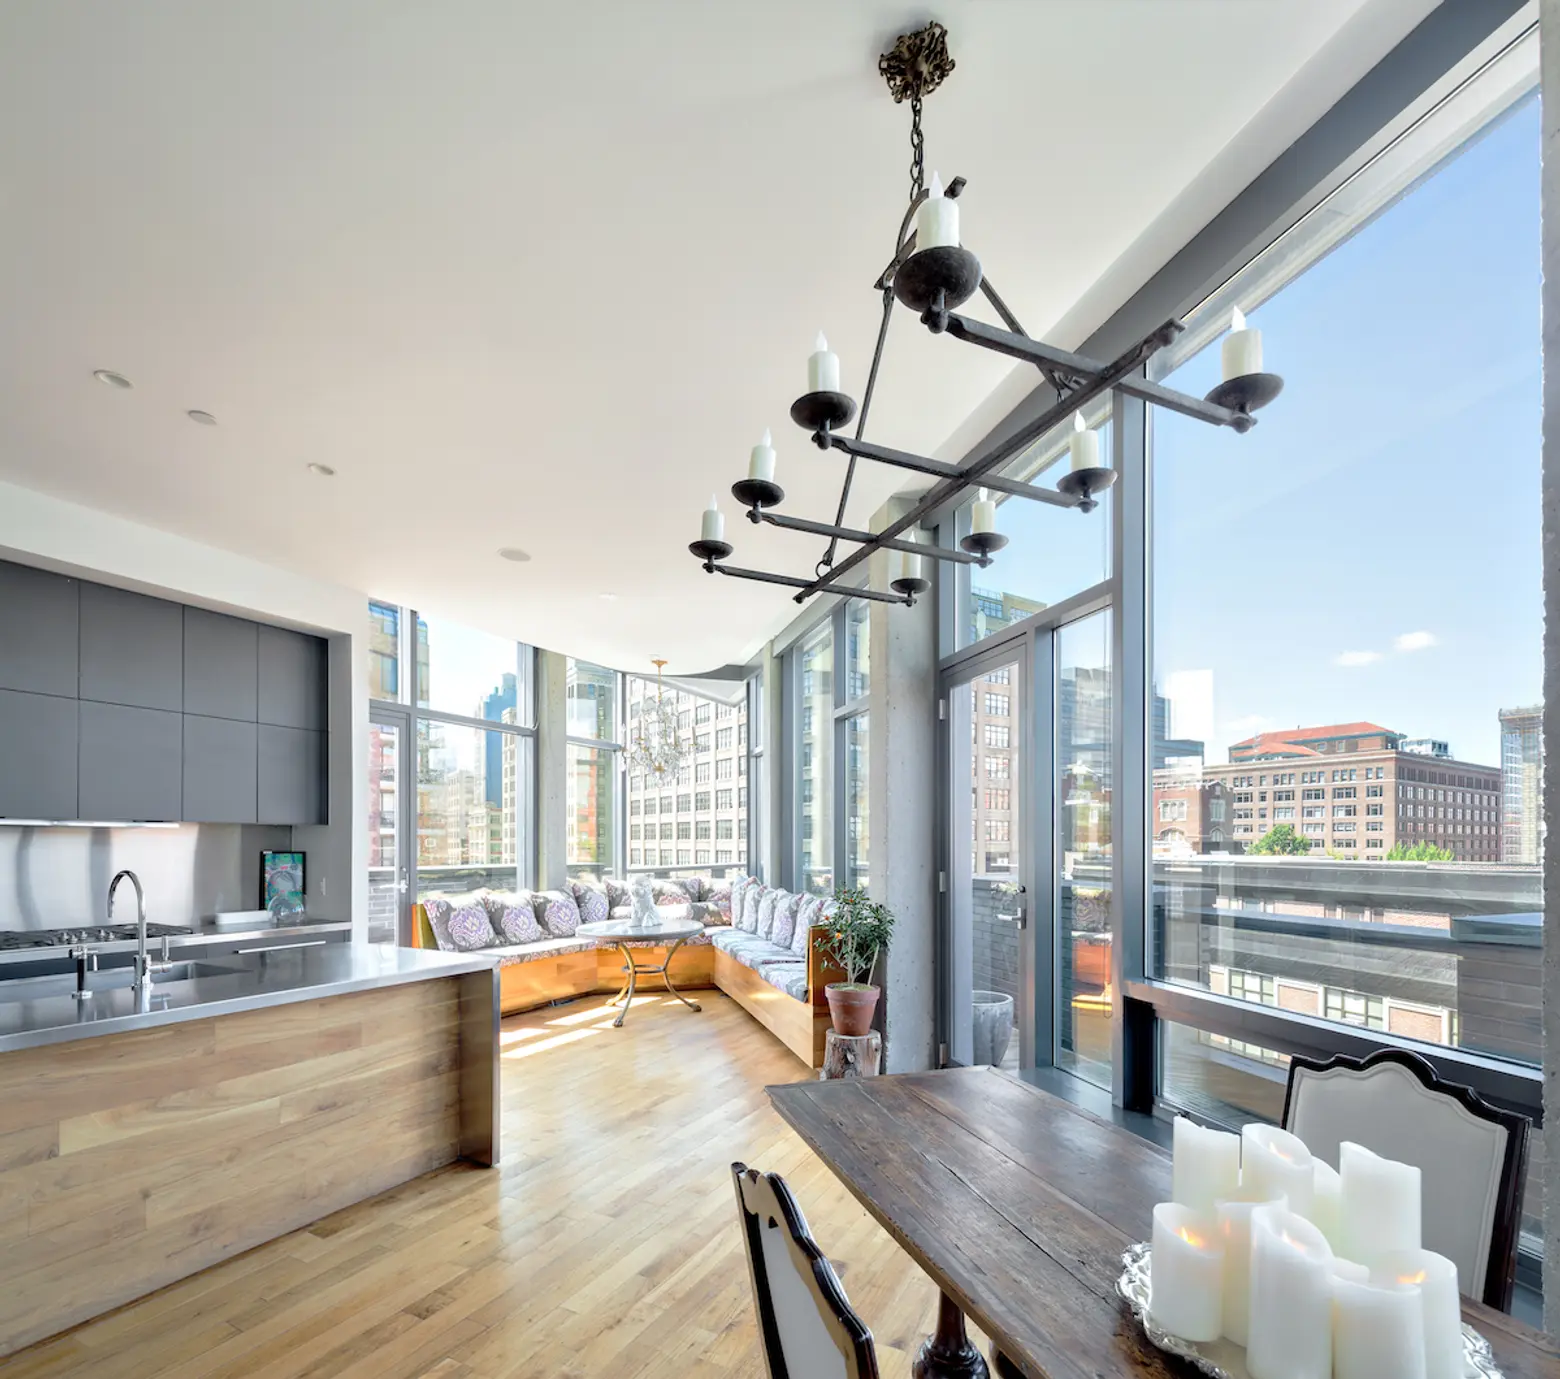 Rent this unusual slice of Village penthouse living for $14.5K a month